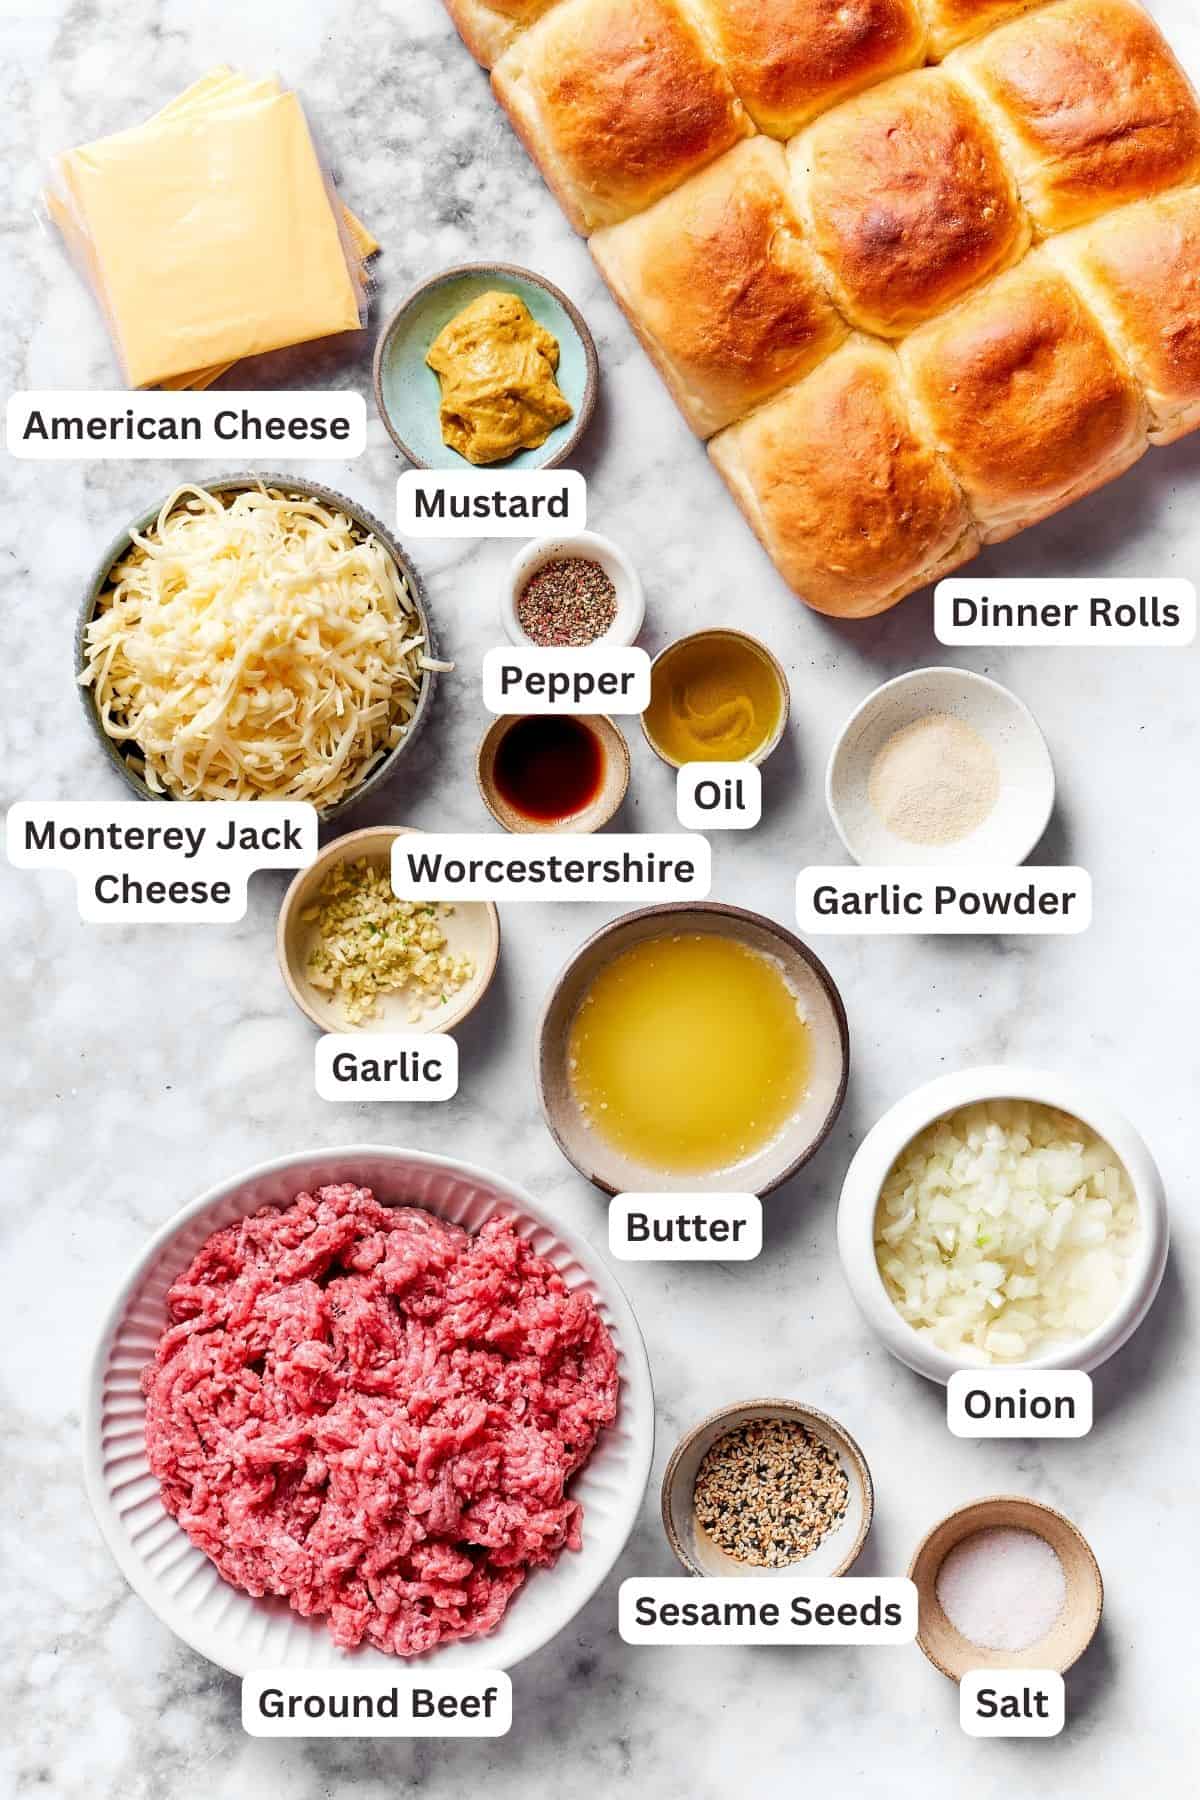 The ingredients for cheeseburger sliders are shown portioned out and labeled: rolls, beef, American cheese, Jack cheese, Worcestershire sauce, garlic powder, oil, butter, onion, garlic, garlic powder, mustard, salt and pepper.